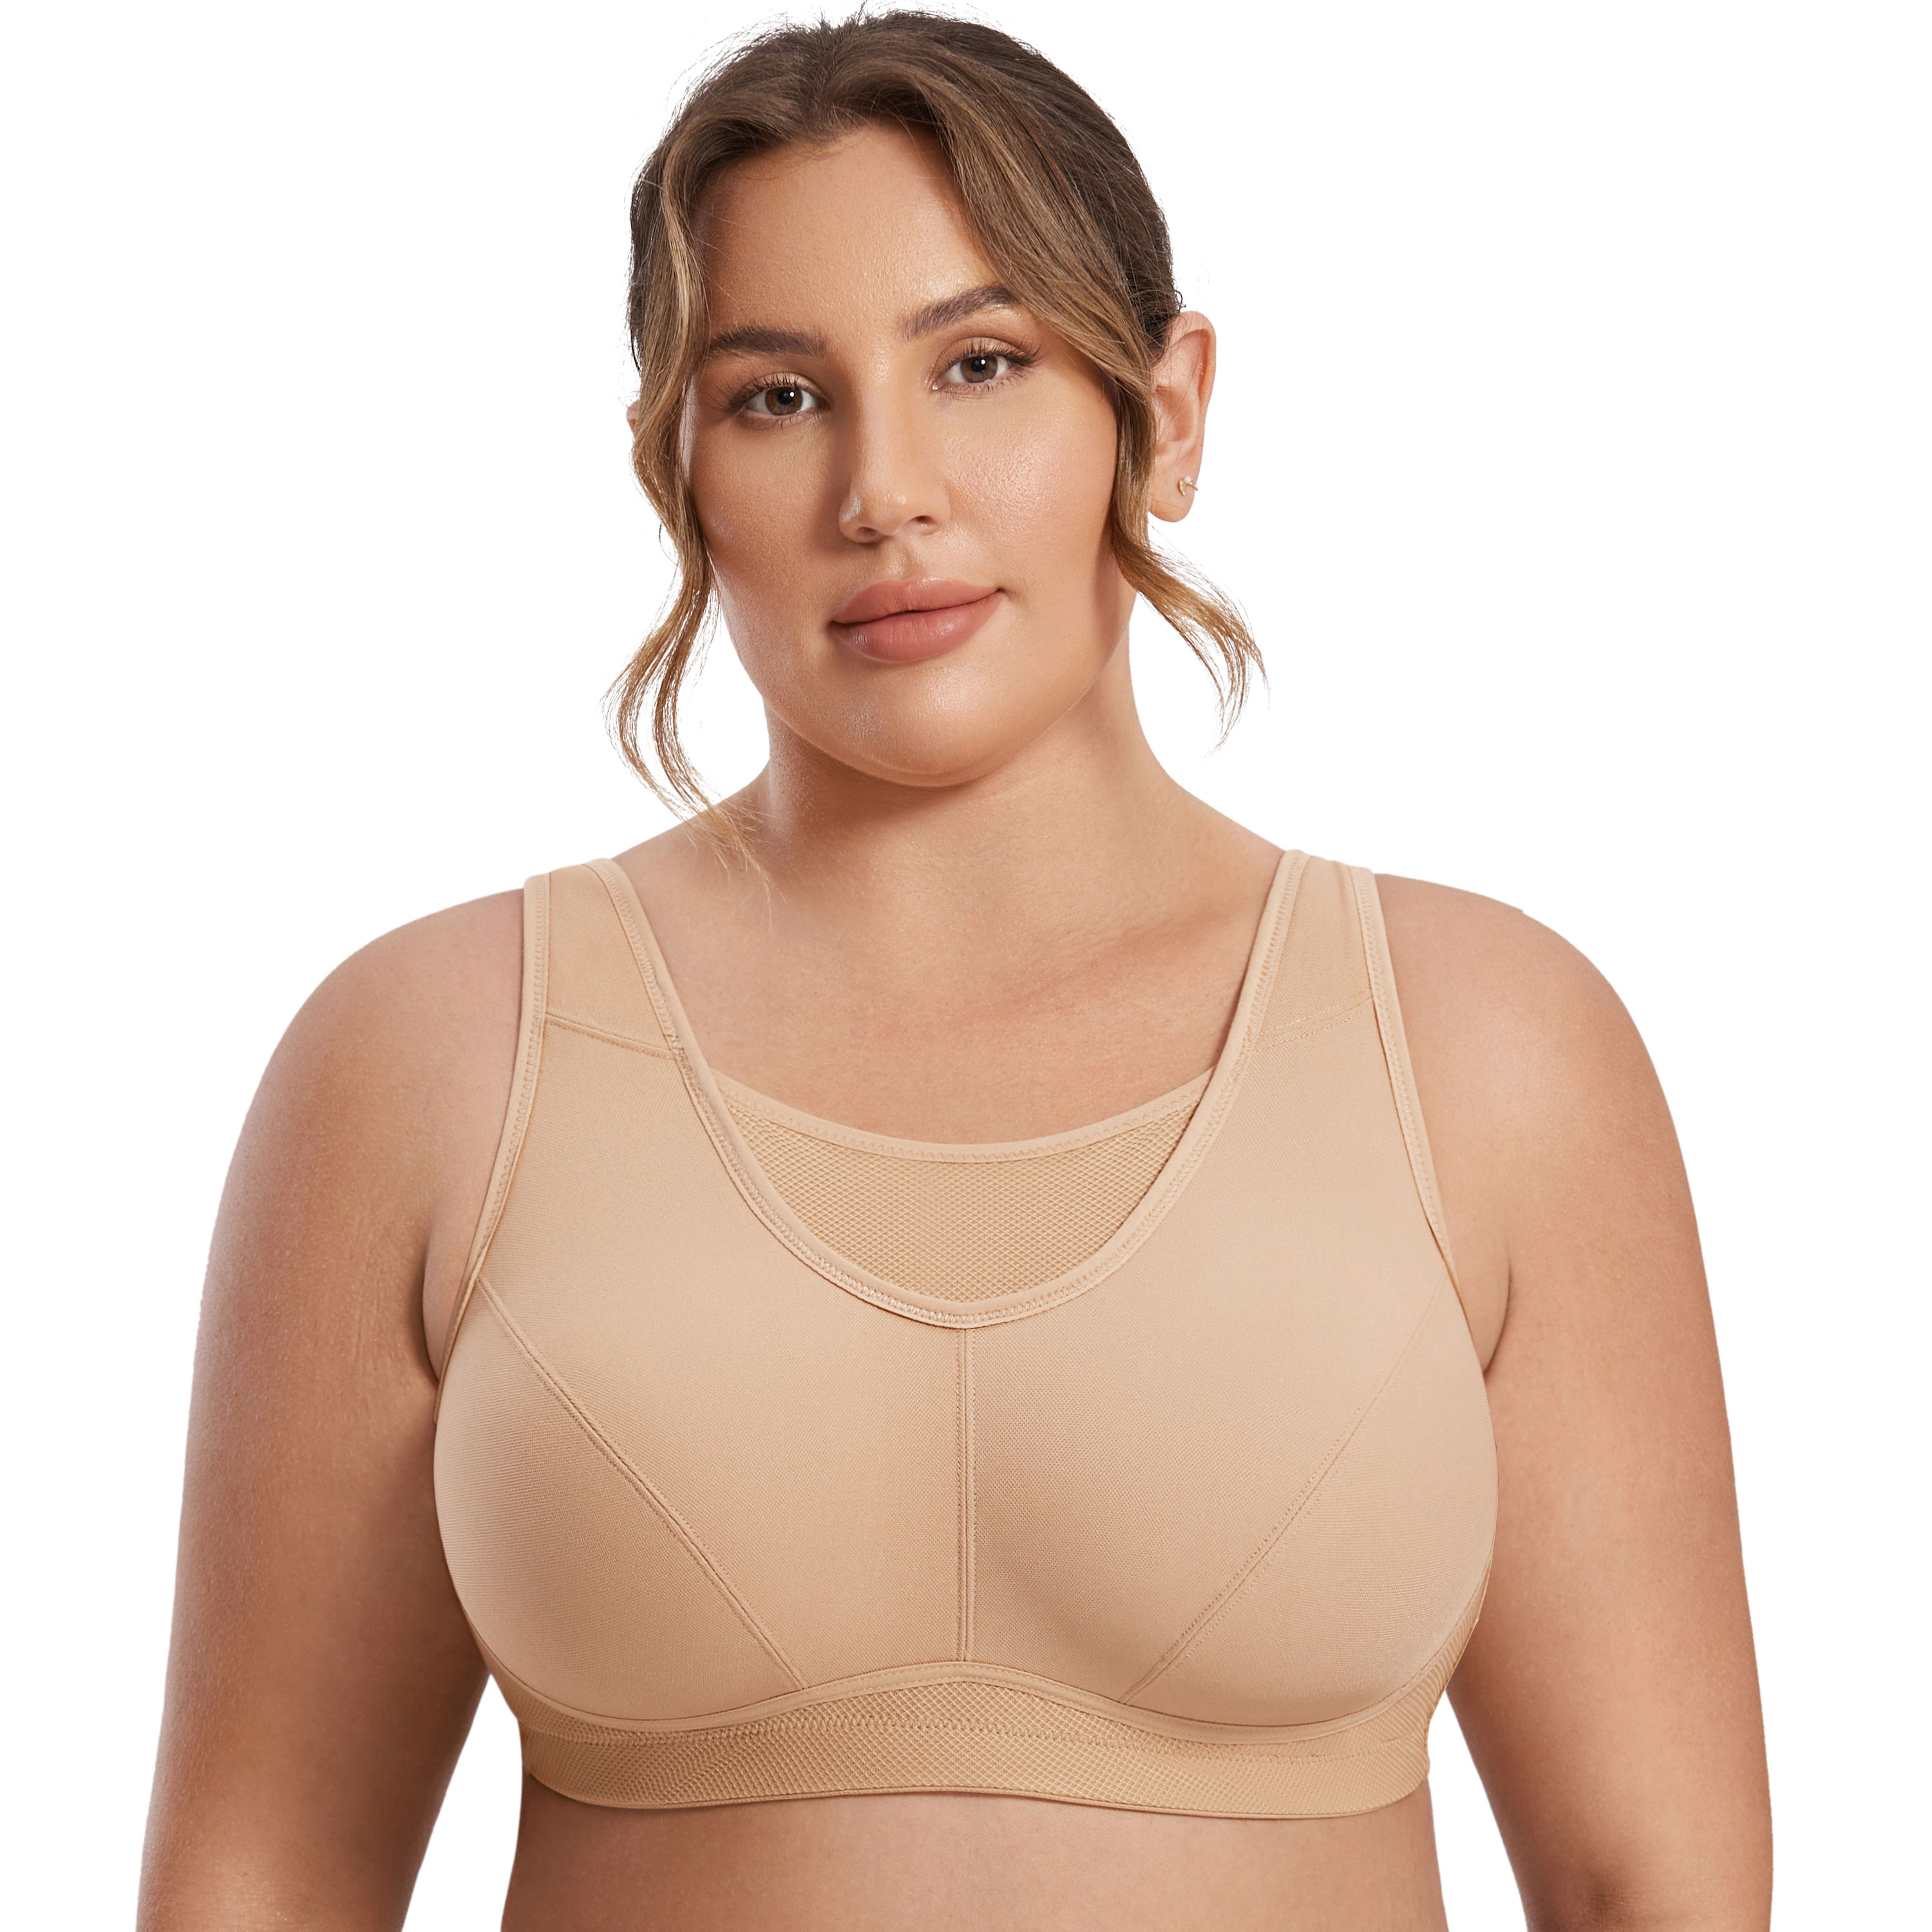 SYROKAN Women's Underwire High Support Plus Size with Adjustable